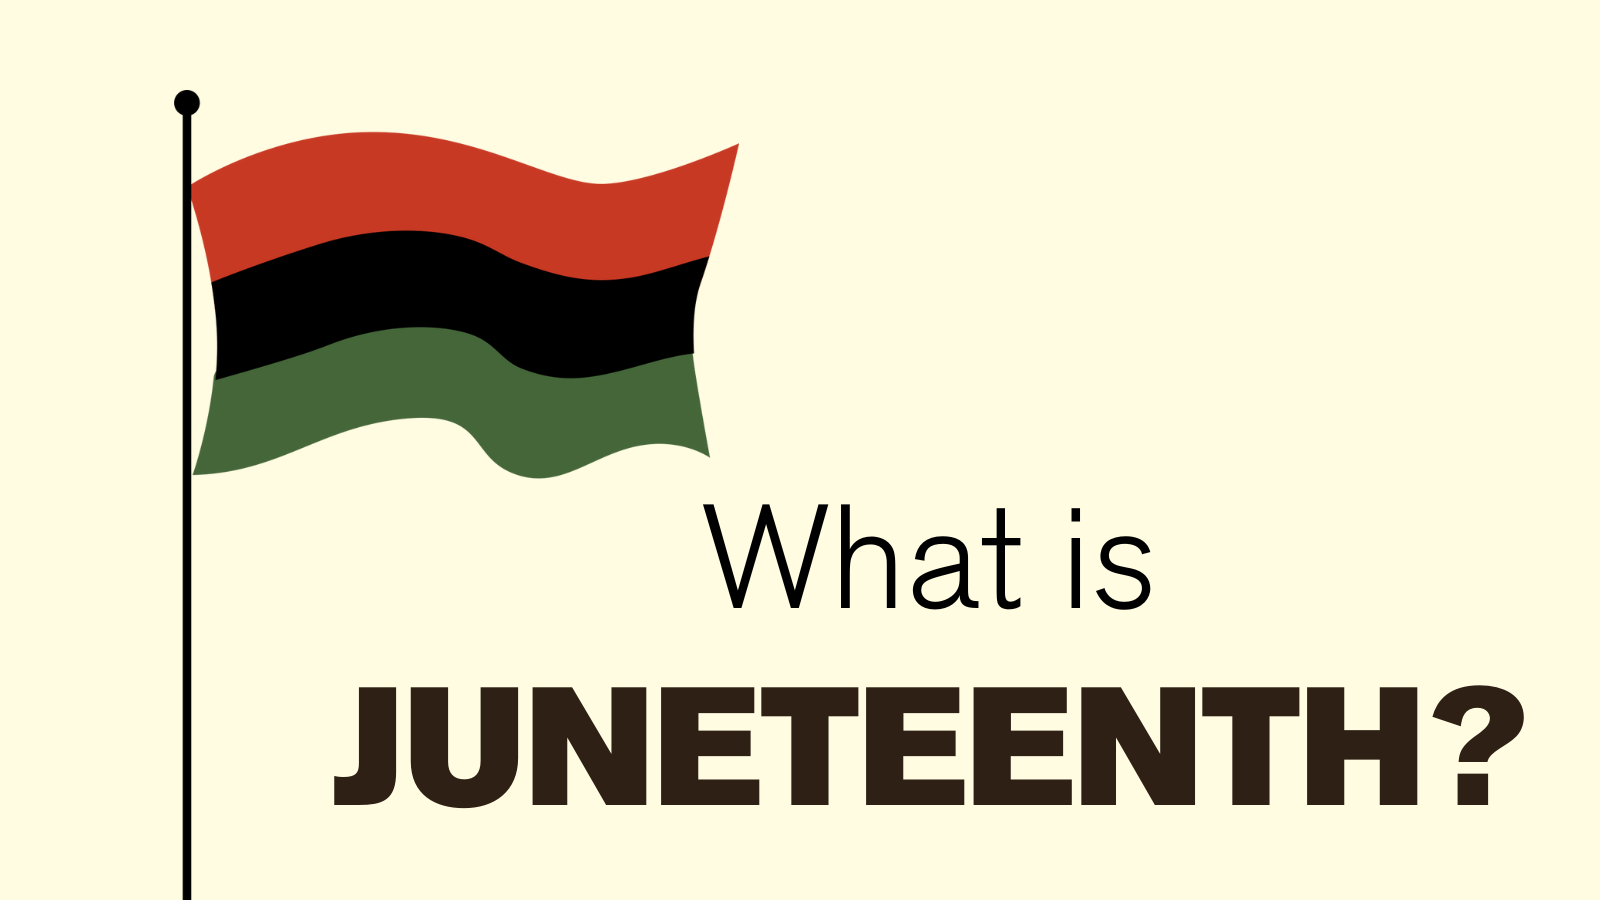 WHY DO WE CELEBRATE JUNETEENTH?